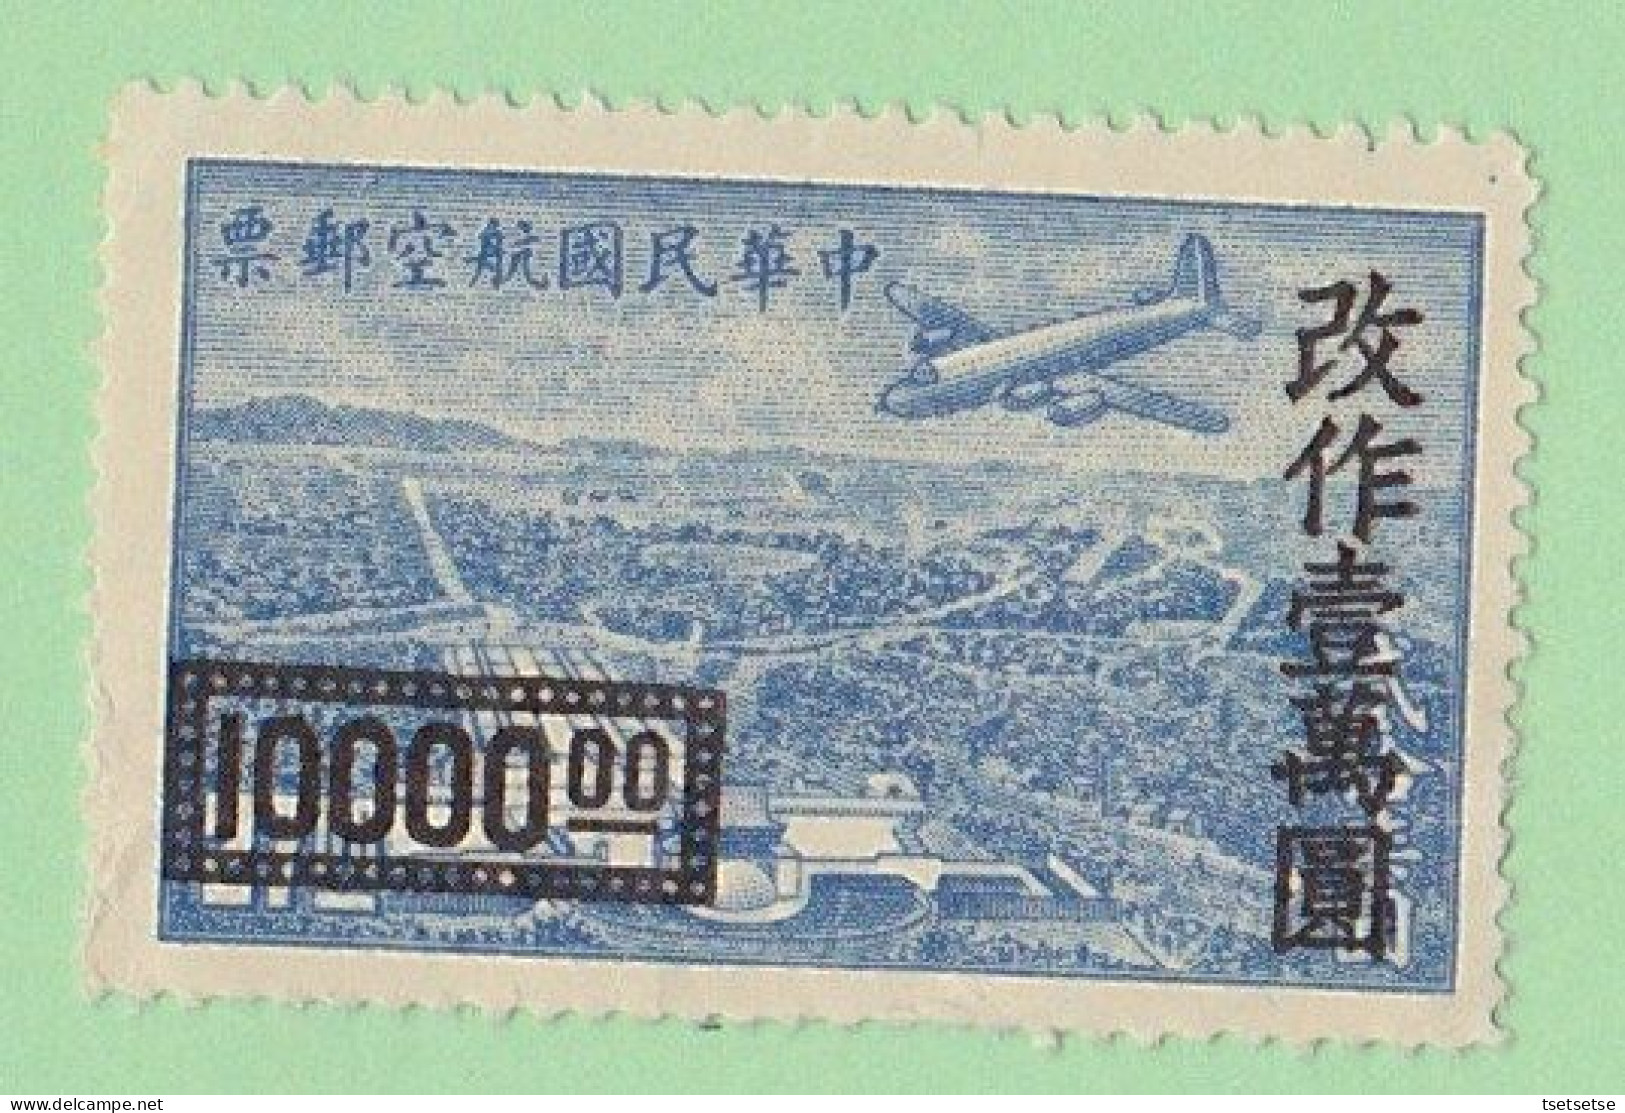 $85 CV! 1963 RO China Taiwan Land To The Tillers Stamp Set, #1383, Mint Unused VF H OG + Mint #C61 - Unused Stamps